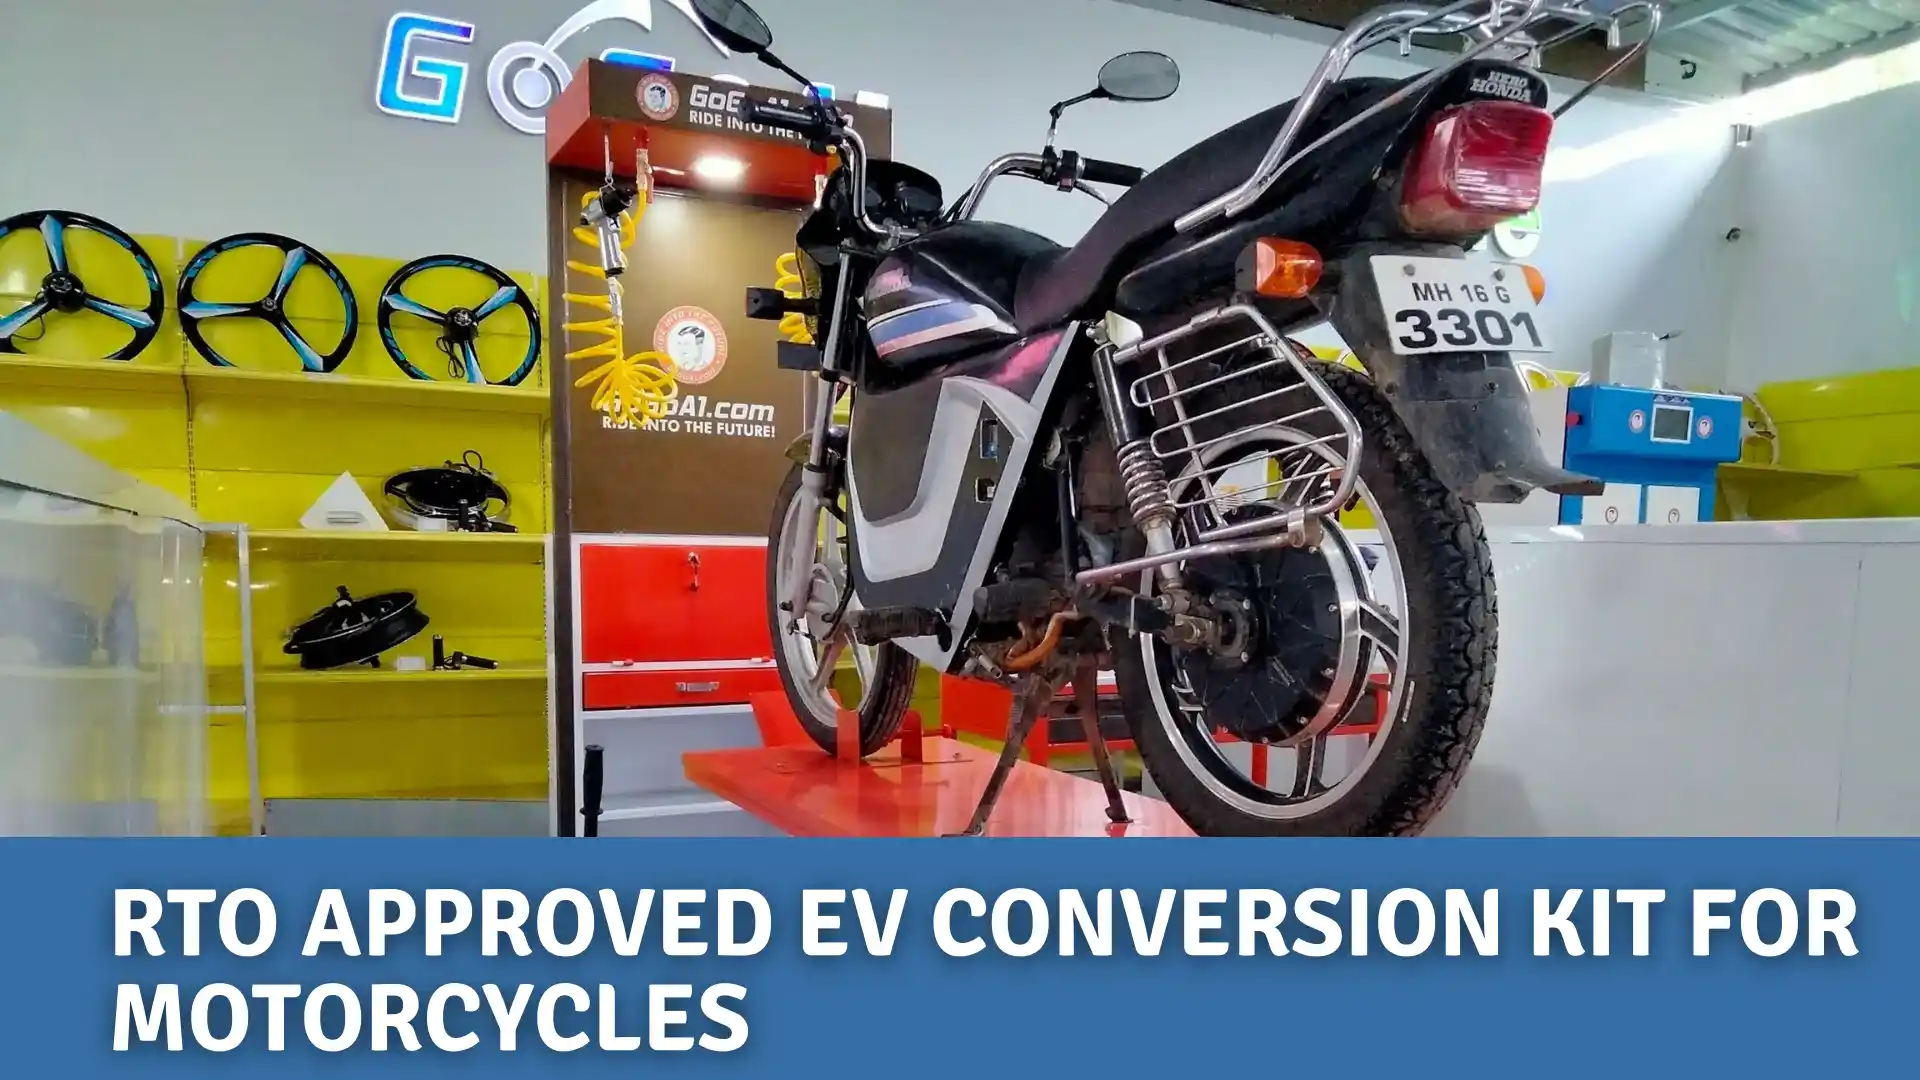 https://e-vehicleinfo.com/ev-conversion-kit-for-motorcycles-indias-first-rto-approved-kit/